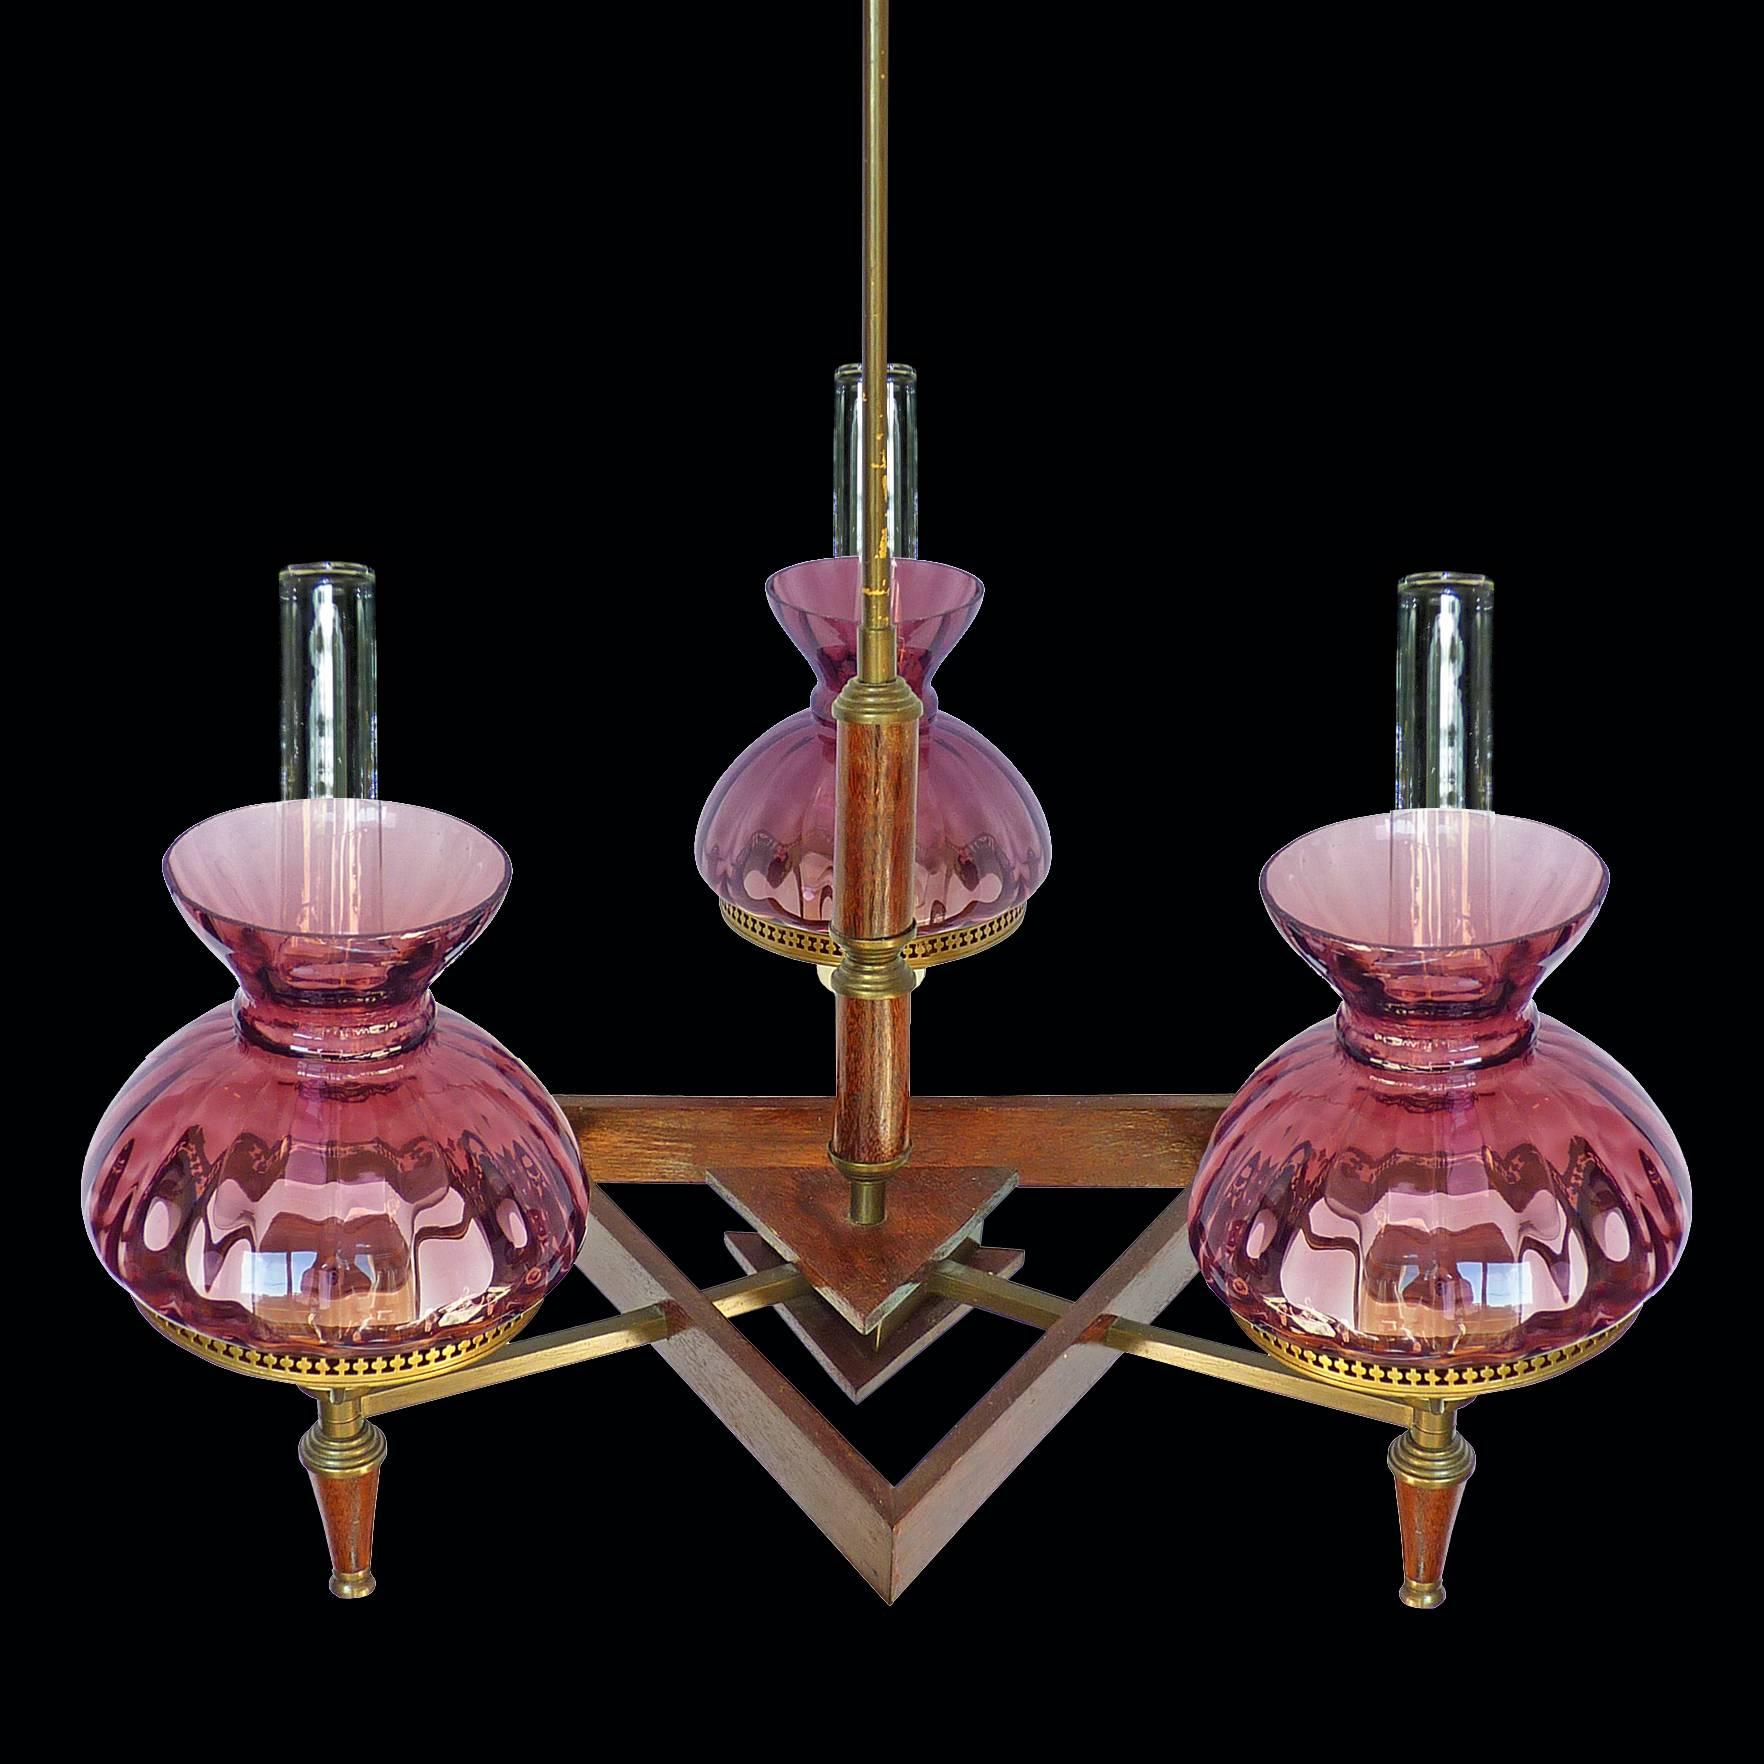 Mid-20th Century French Art Deco Purple, Plum, Amethyst Glass Shades Wood and Brass Chandelier For Sale